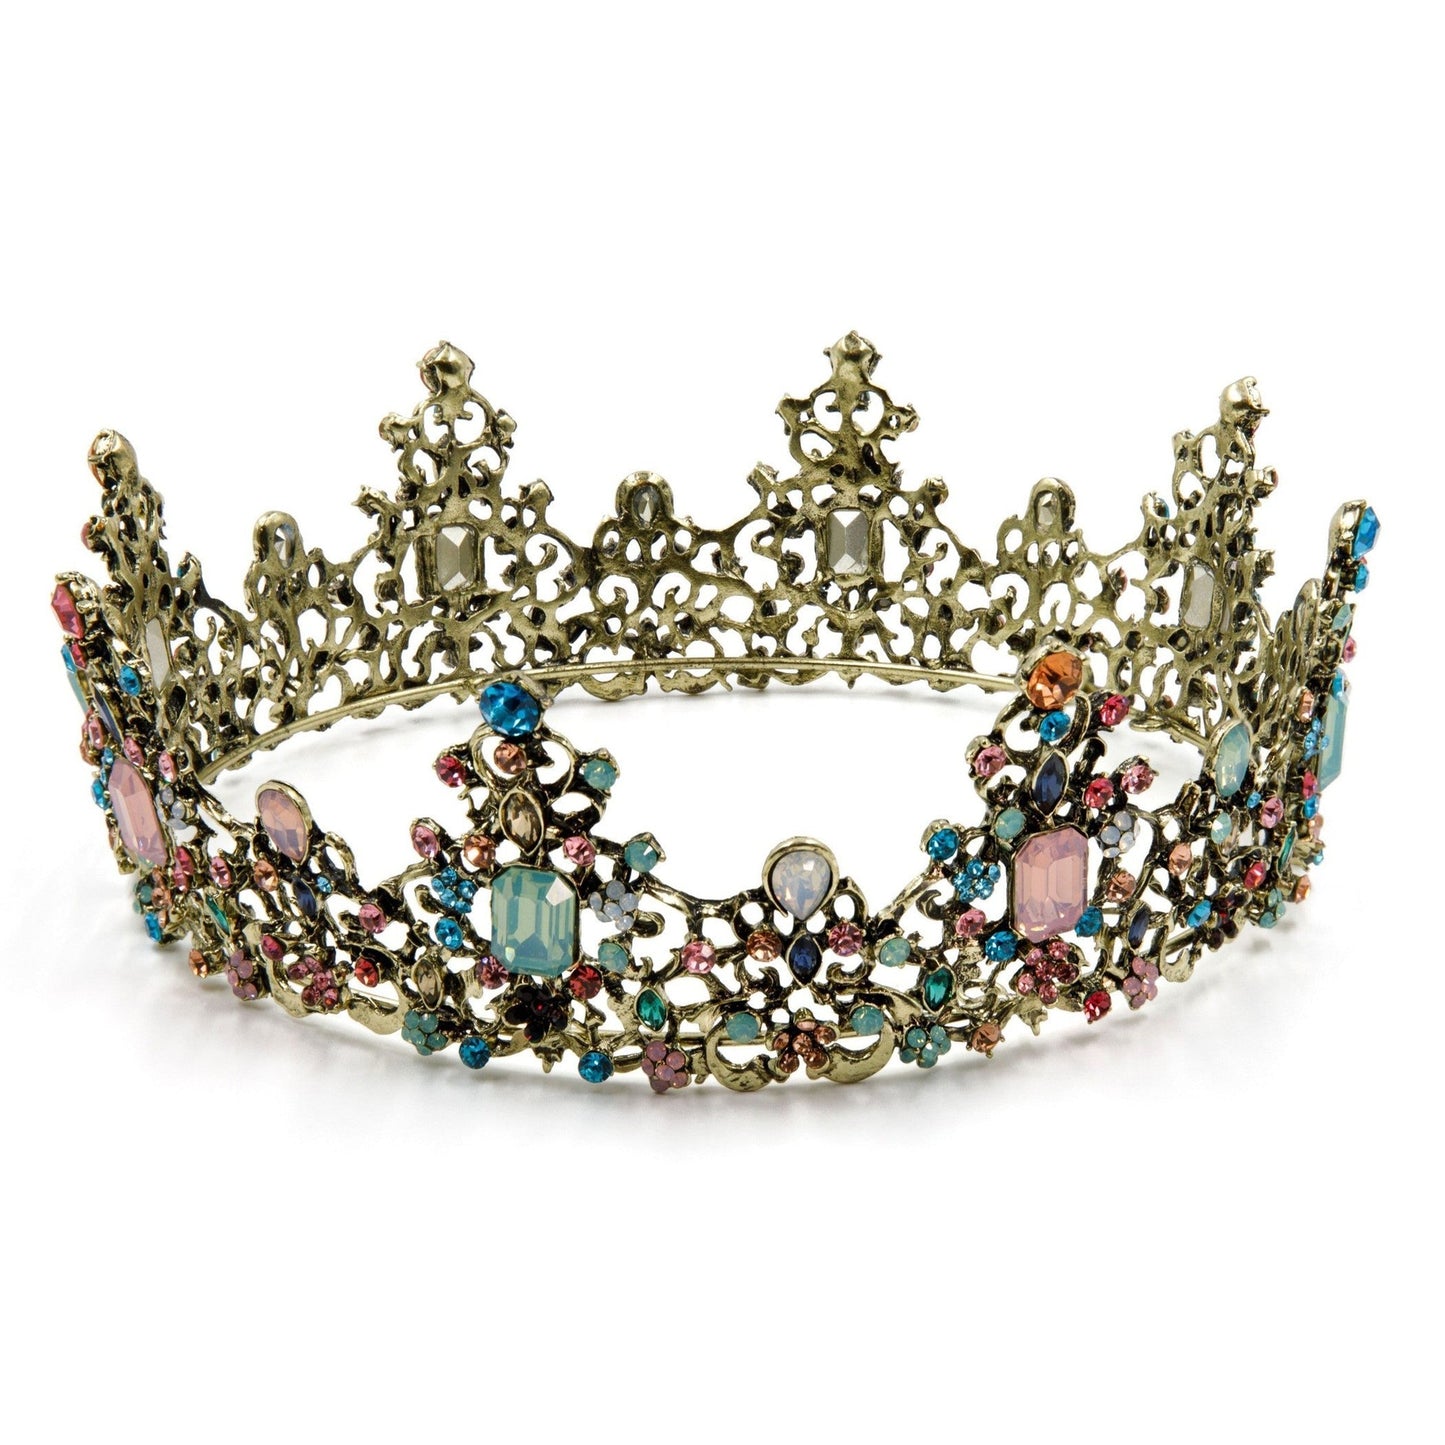 Princess of Pastels Luxe Tiara Crown | Royalty Crown Party or Bridal Hair Accessory